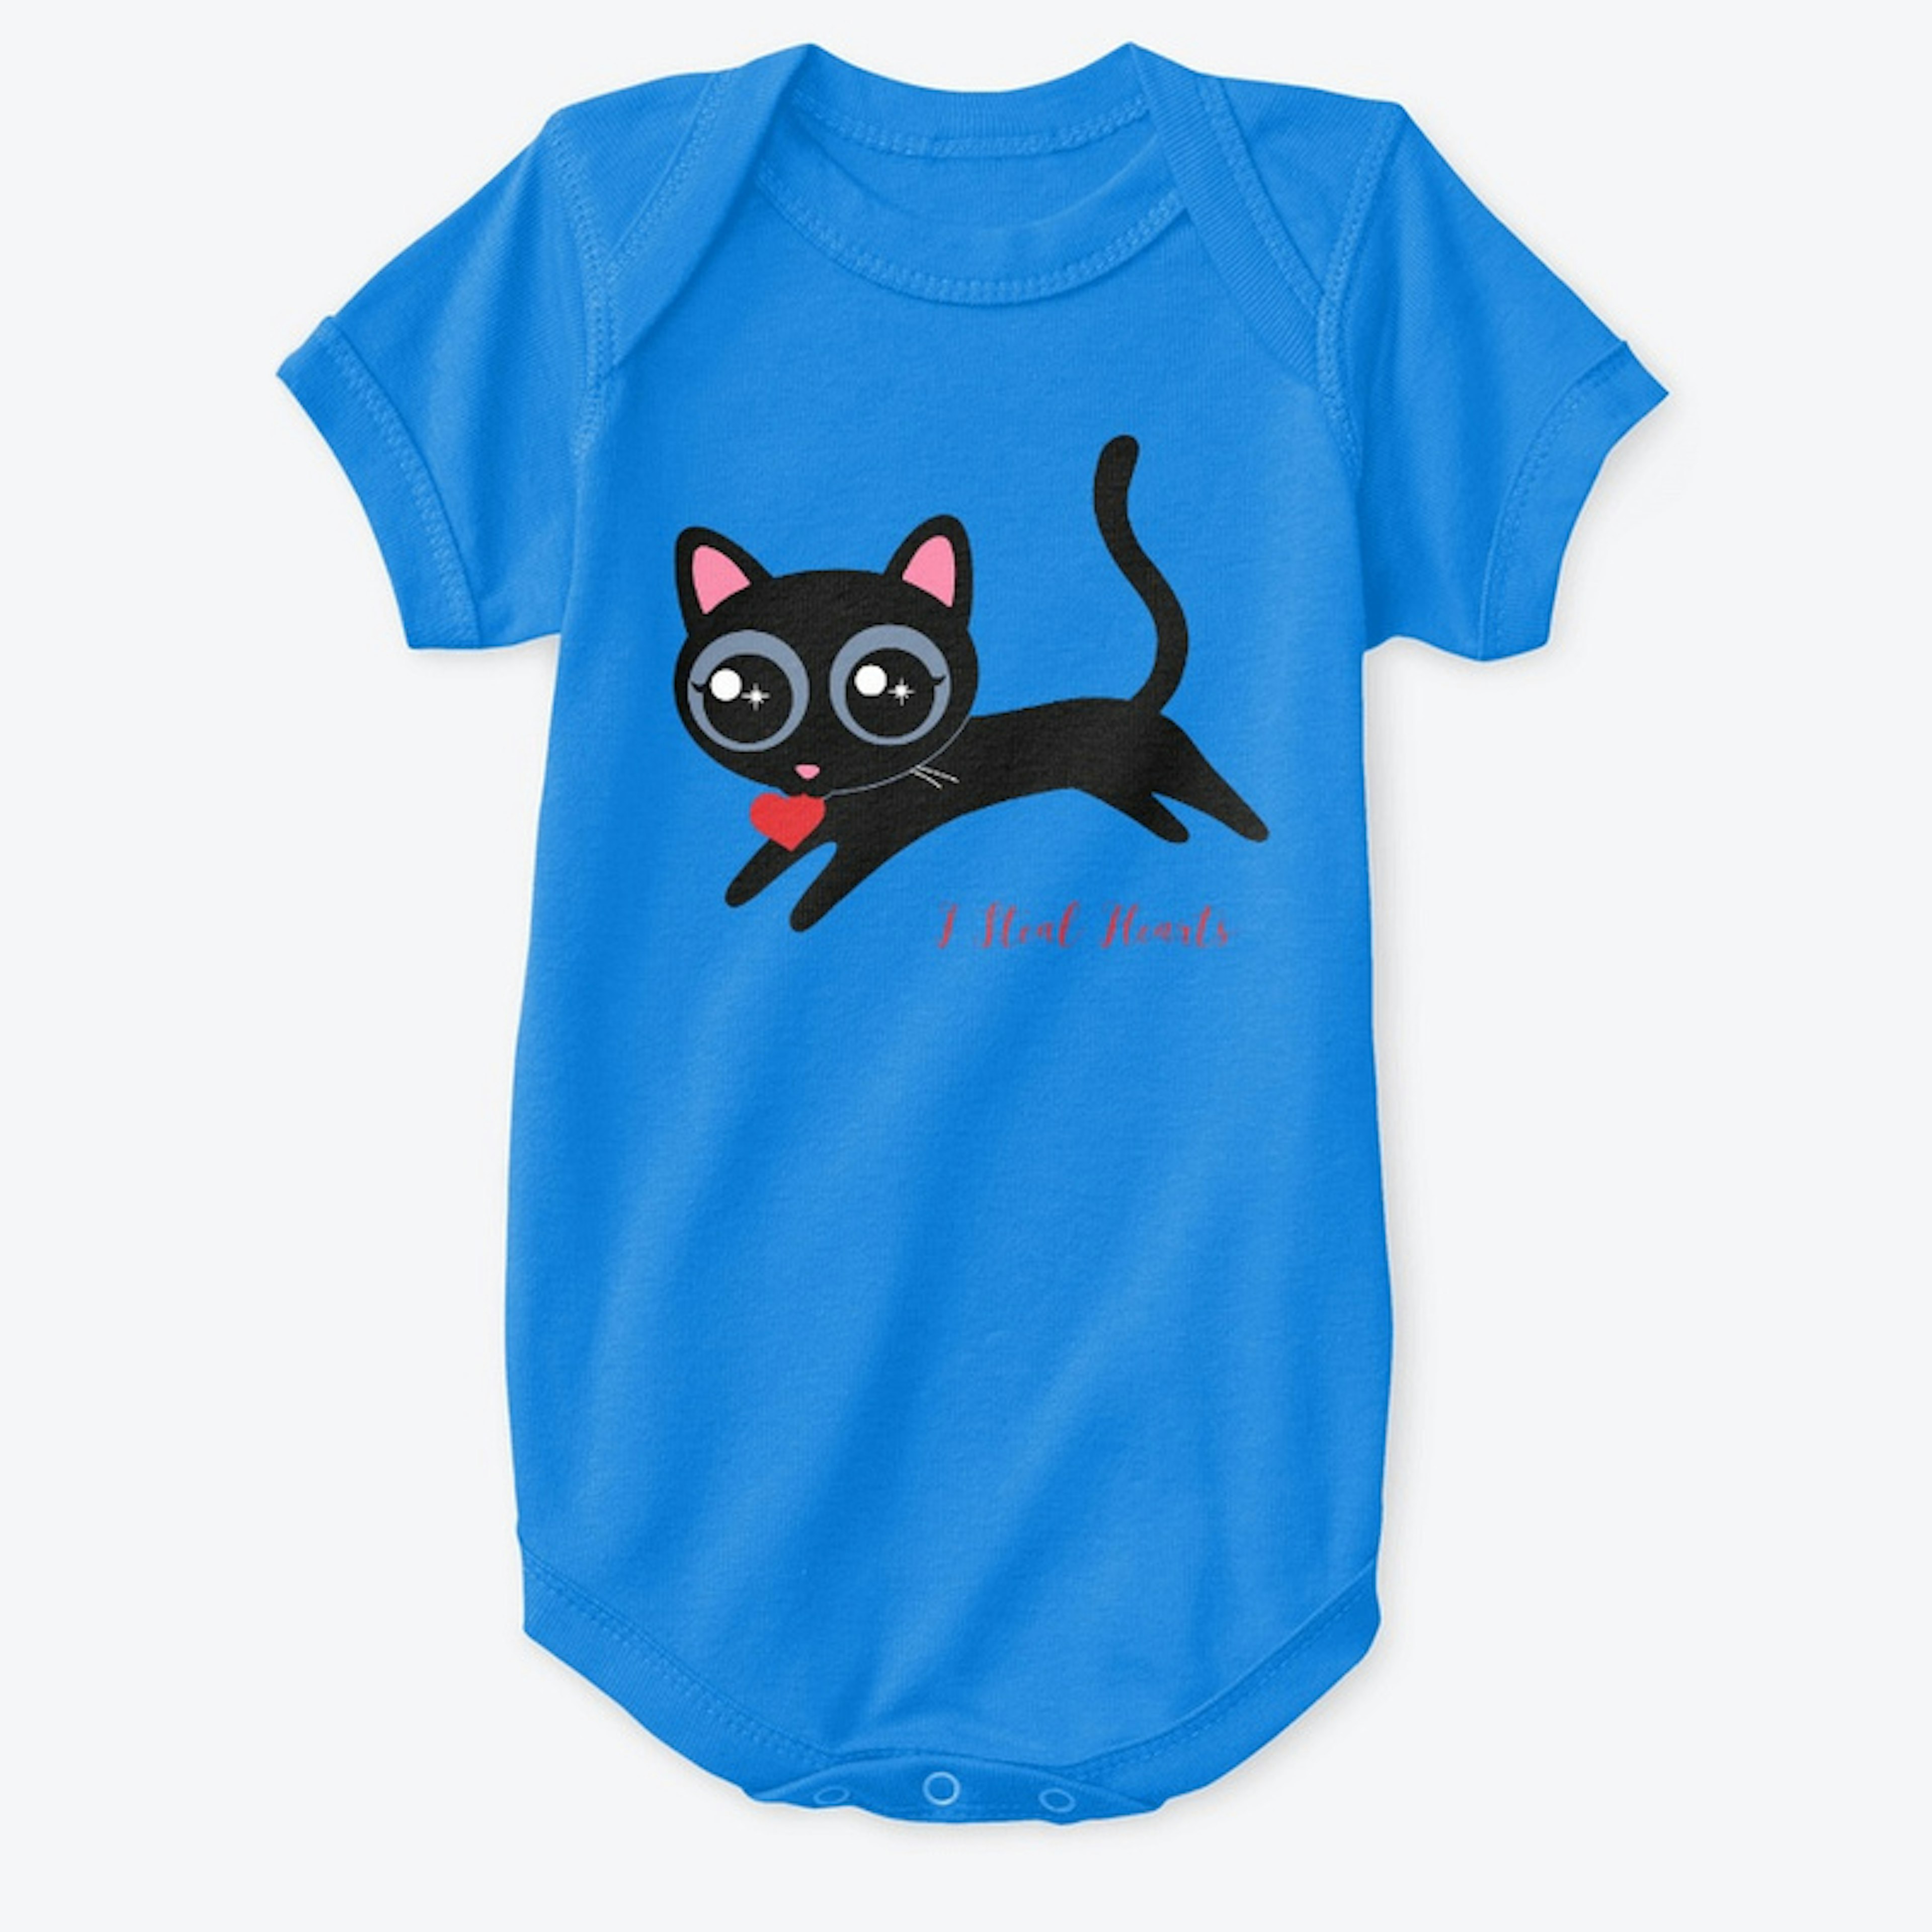 I Steal Hearts Kitty Cute Gift for Girl